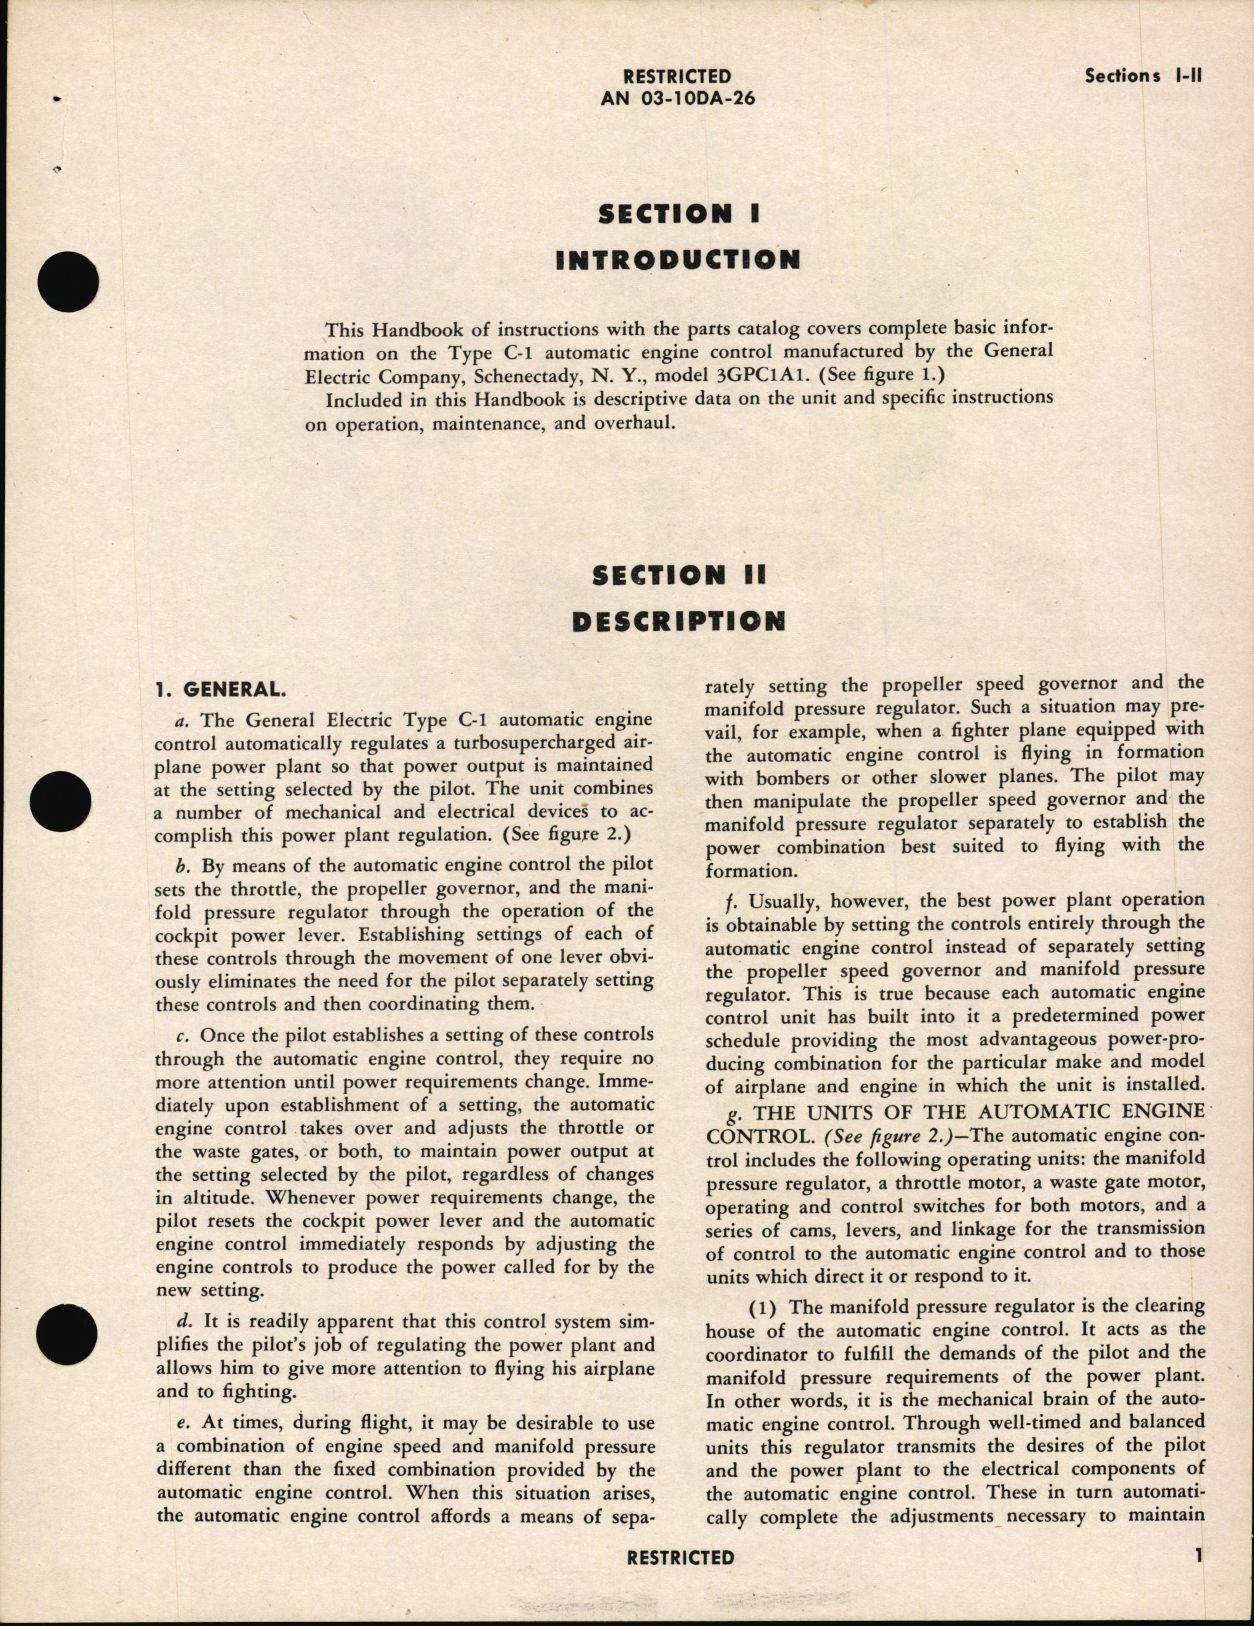 Sample page 5 from AirCorps Library document: Operation, Service, & Overhaul Instructions with Parts Catalog for Automatic Engine Control Type C-1 Model 3GPC1A1